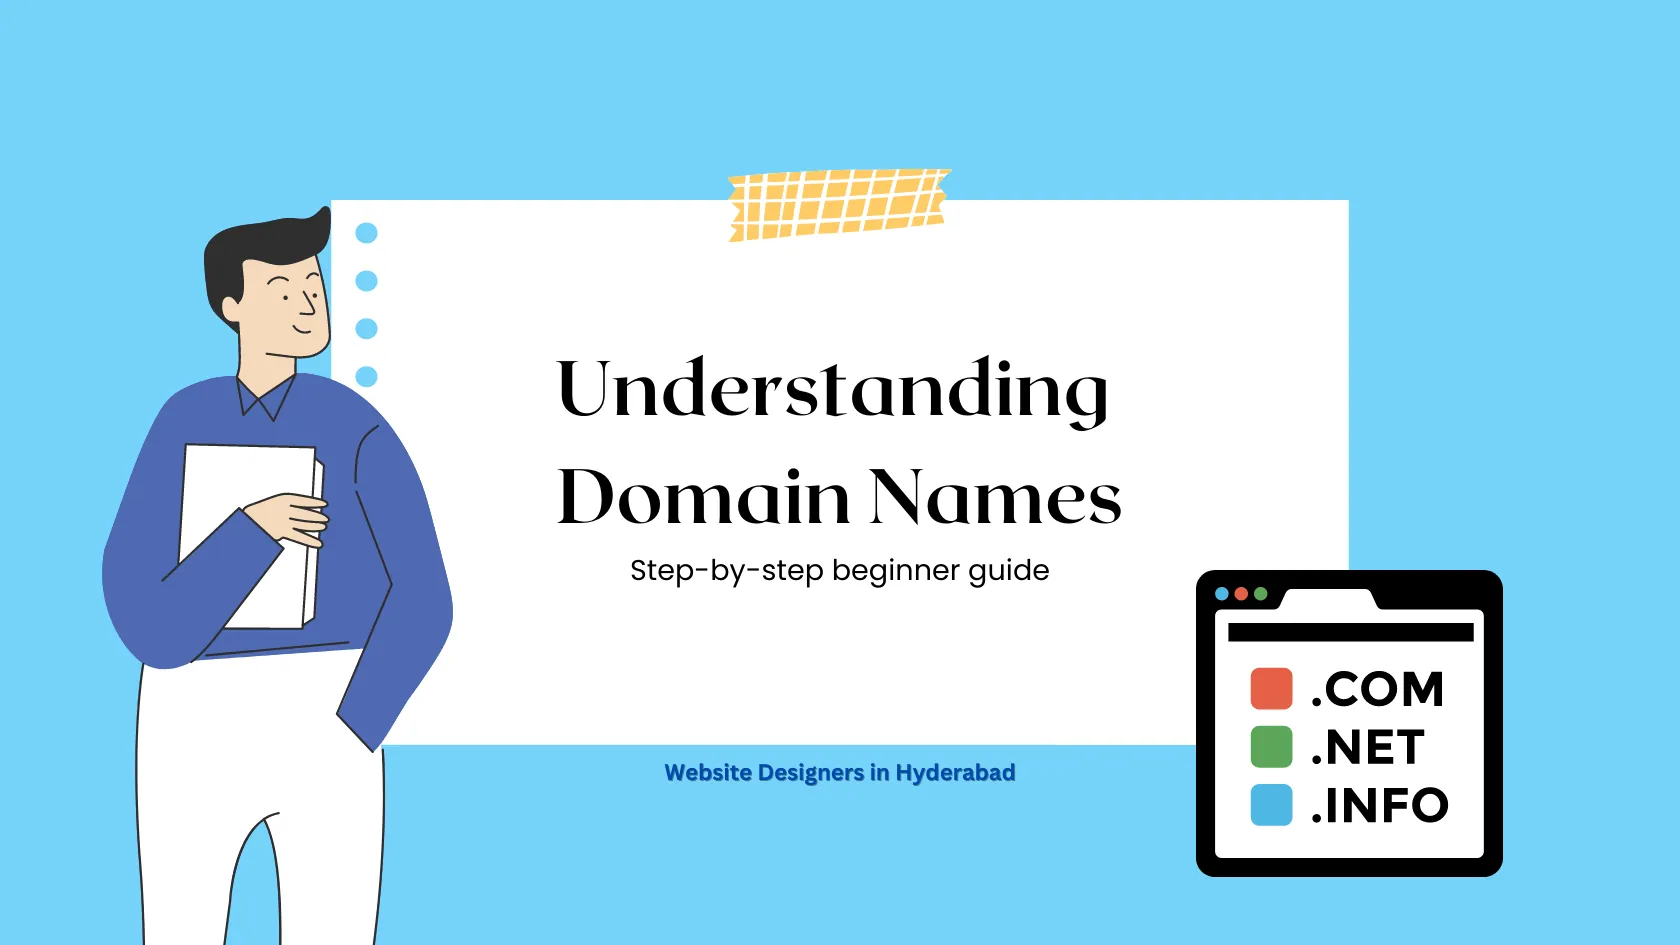 Understand ing Domain Names